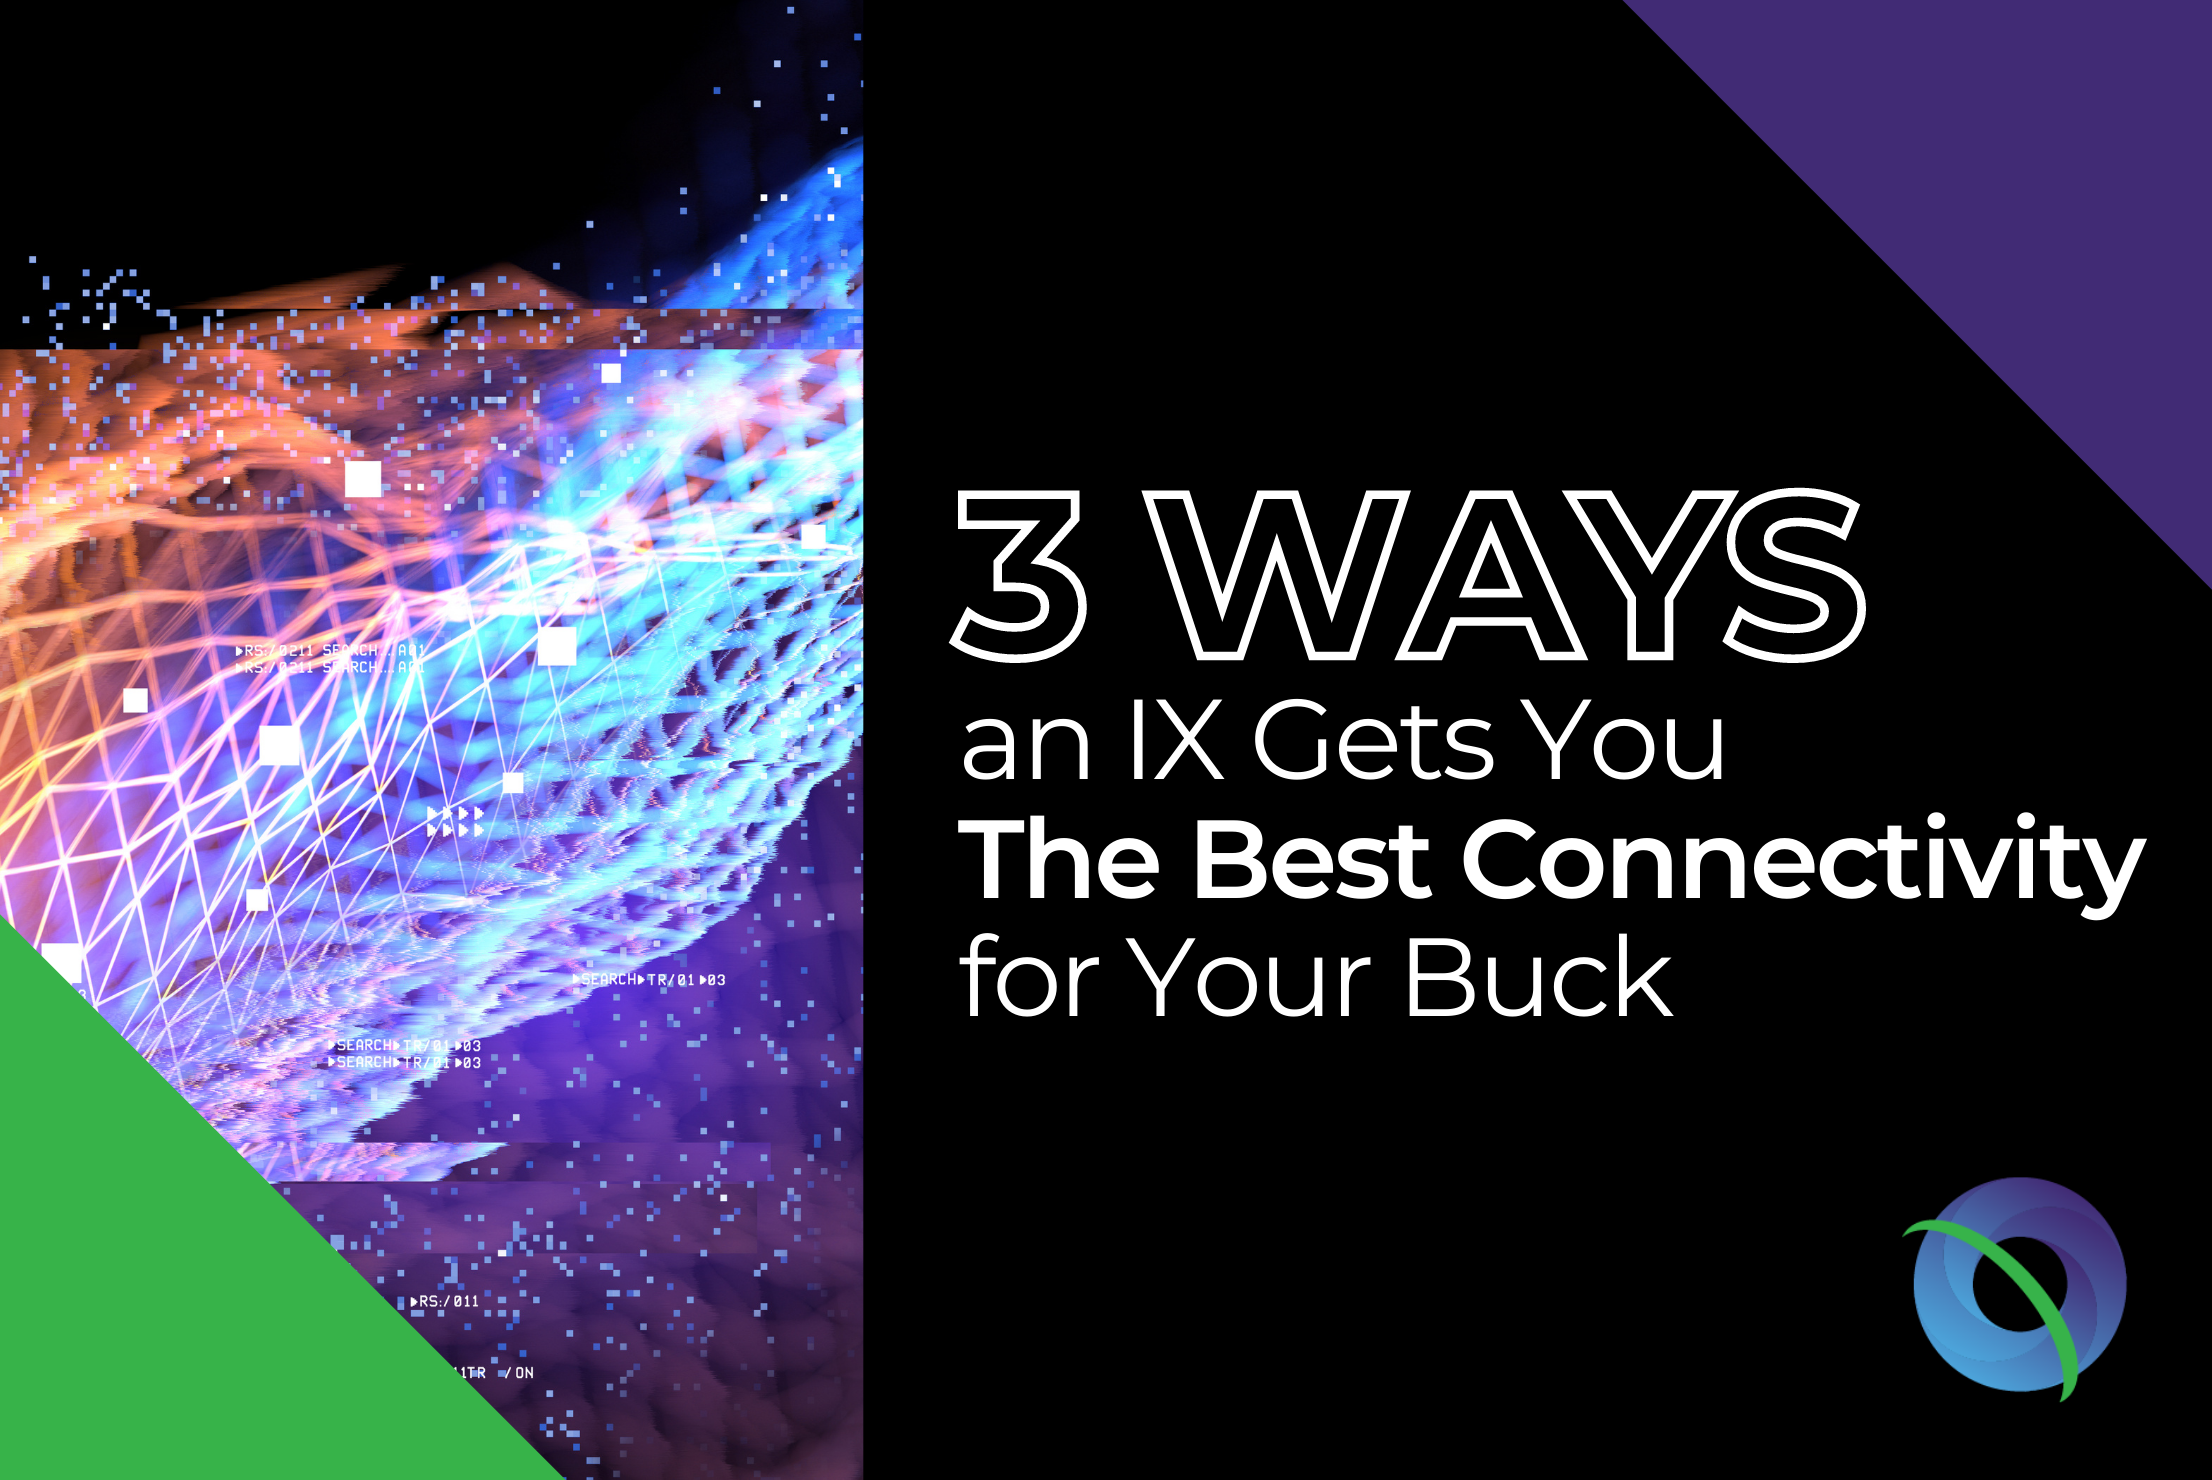 3 Ways an IX Gets You The Best Connectivity for Your Buck